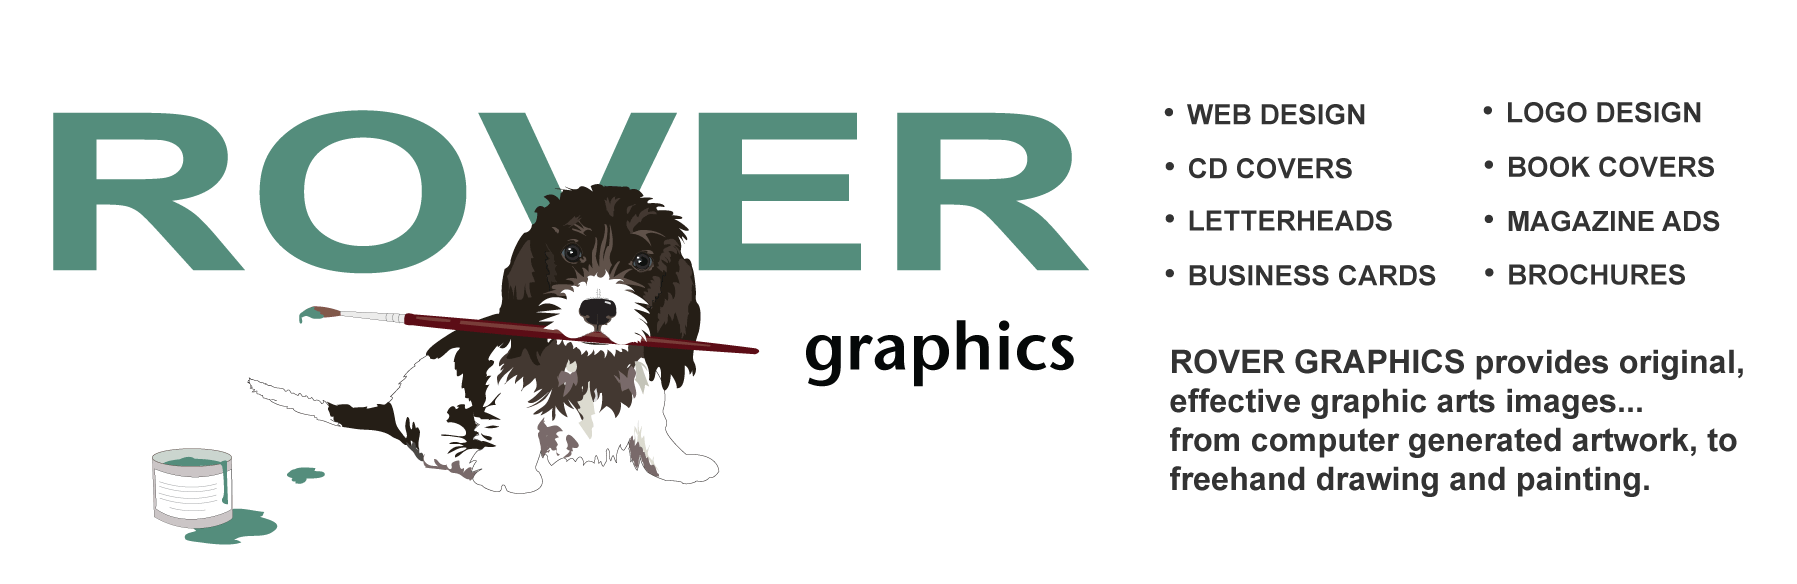 Rover Graphics banner